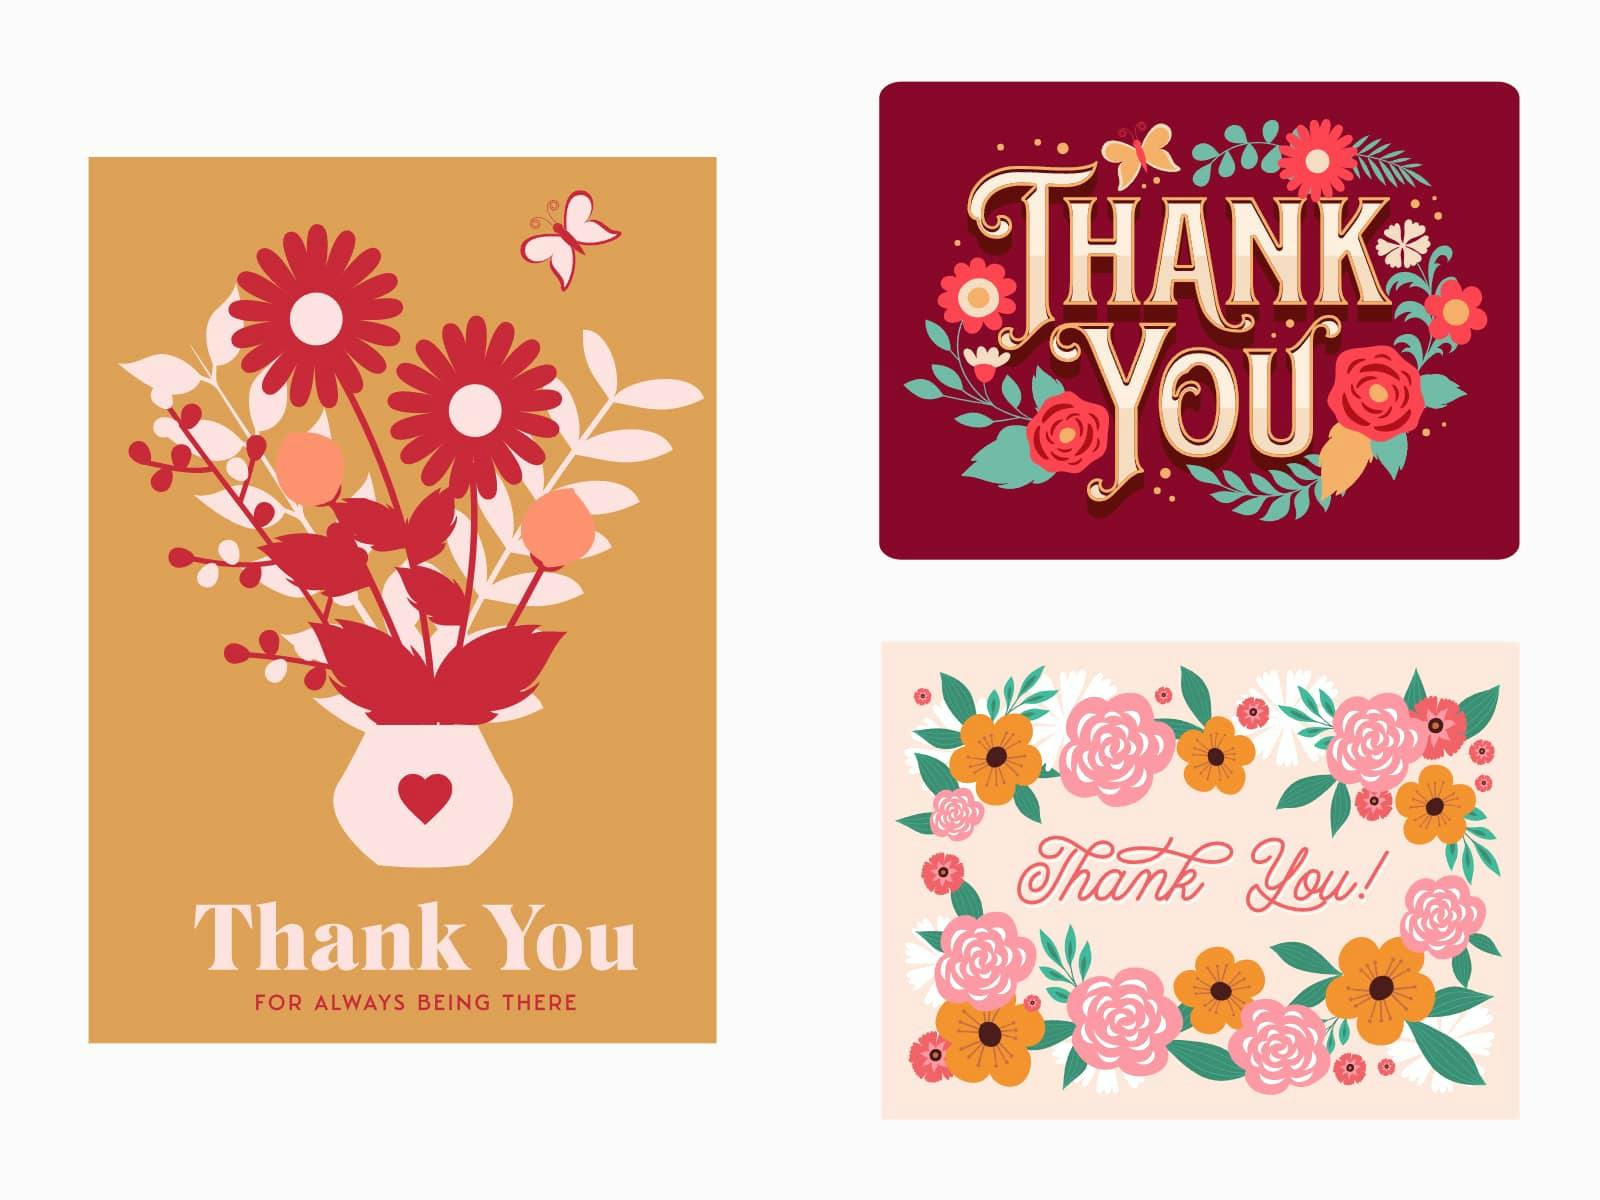 Thank You Card: Collection of customizable thank you cards